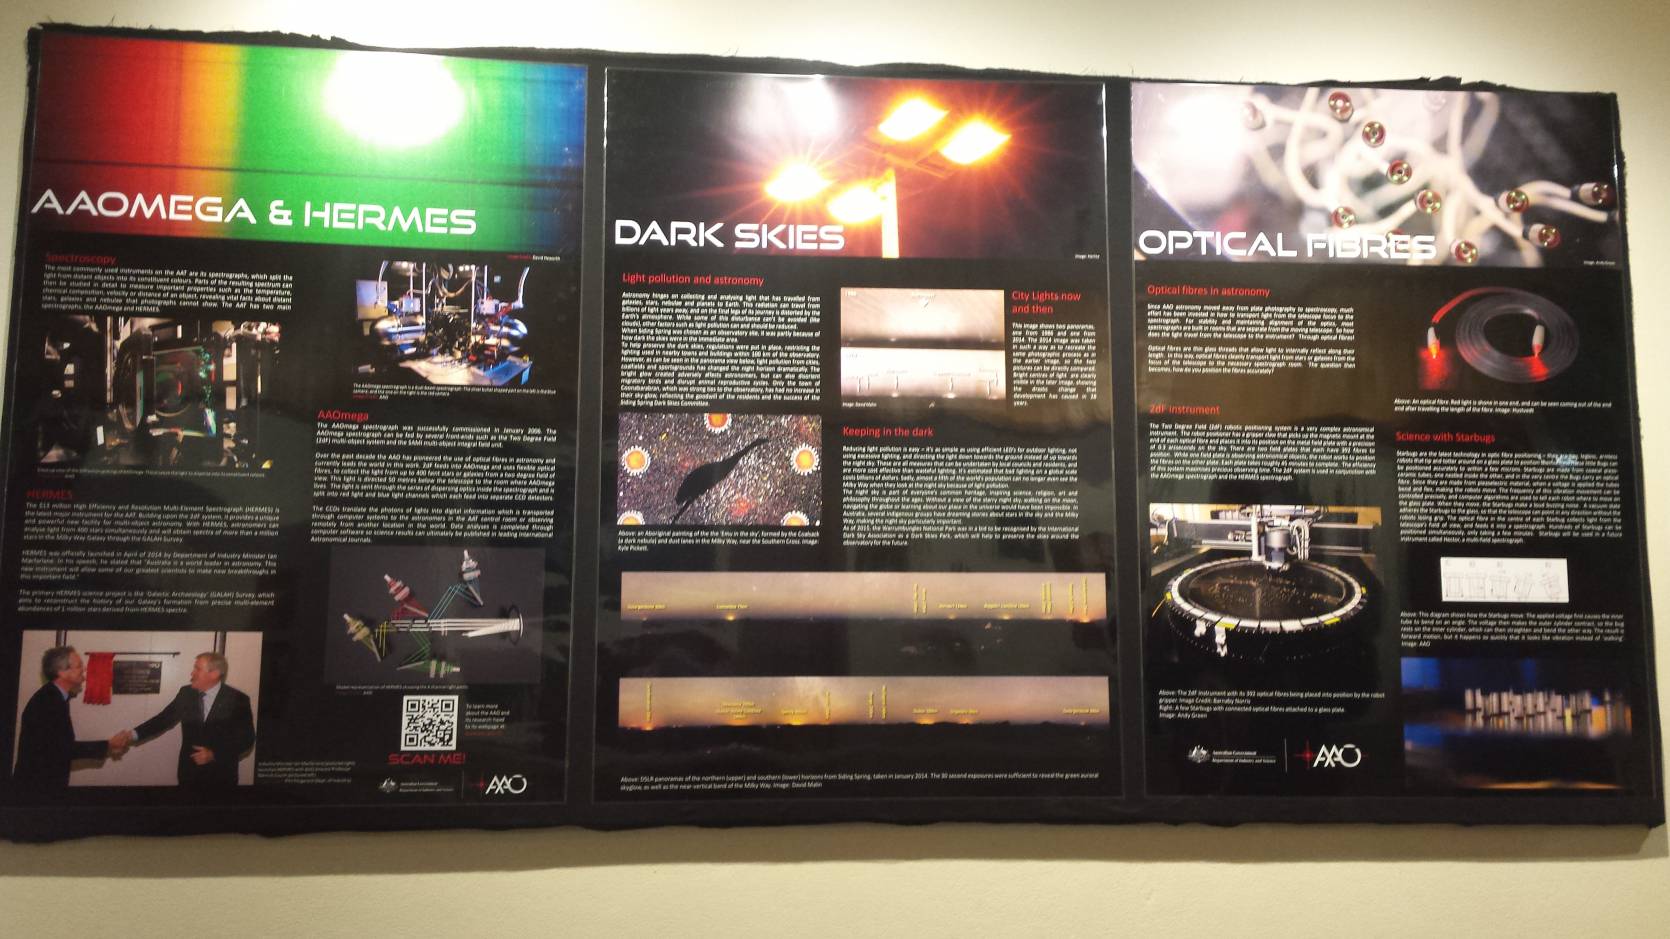 One of the 3 main poster walls, with this one showing the technology that was developed at the AAT.